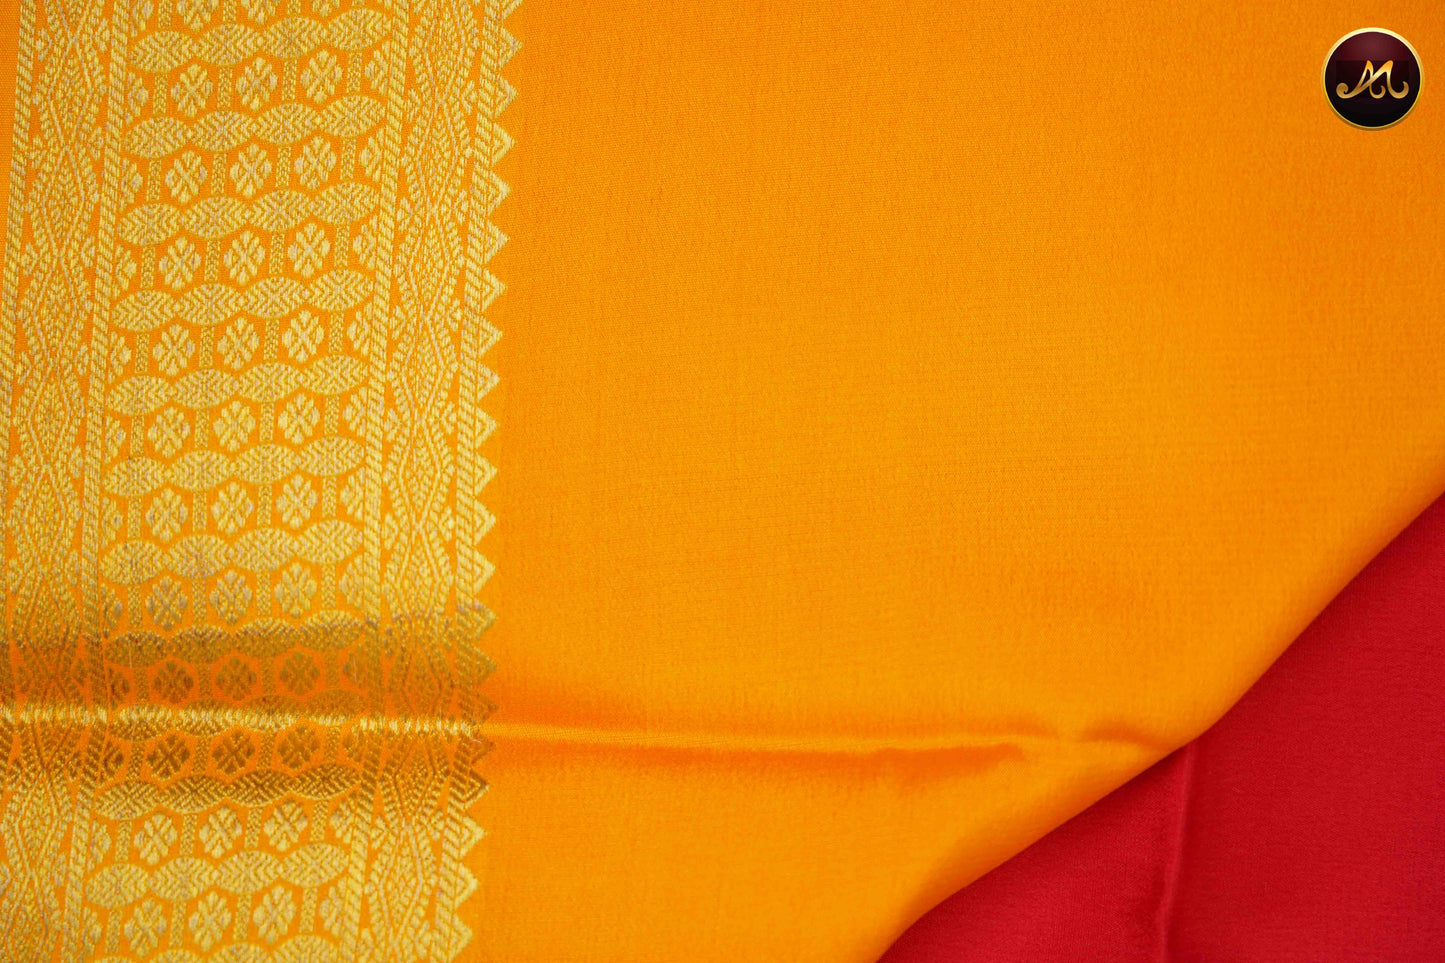 Mysore crepe silk saree with KSIC Finish in Red and Mango Yellow combination with gold zari border and chit pallu